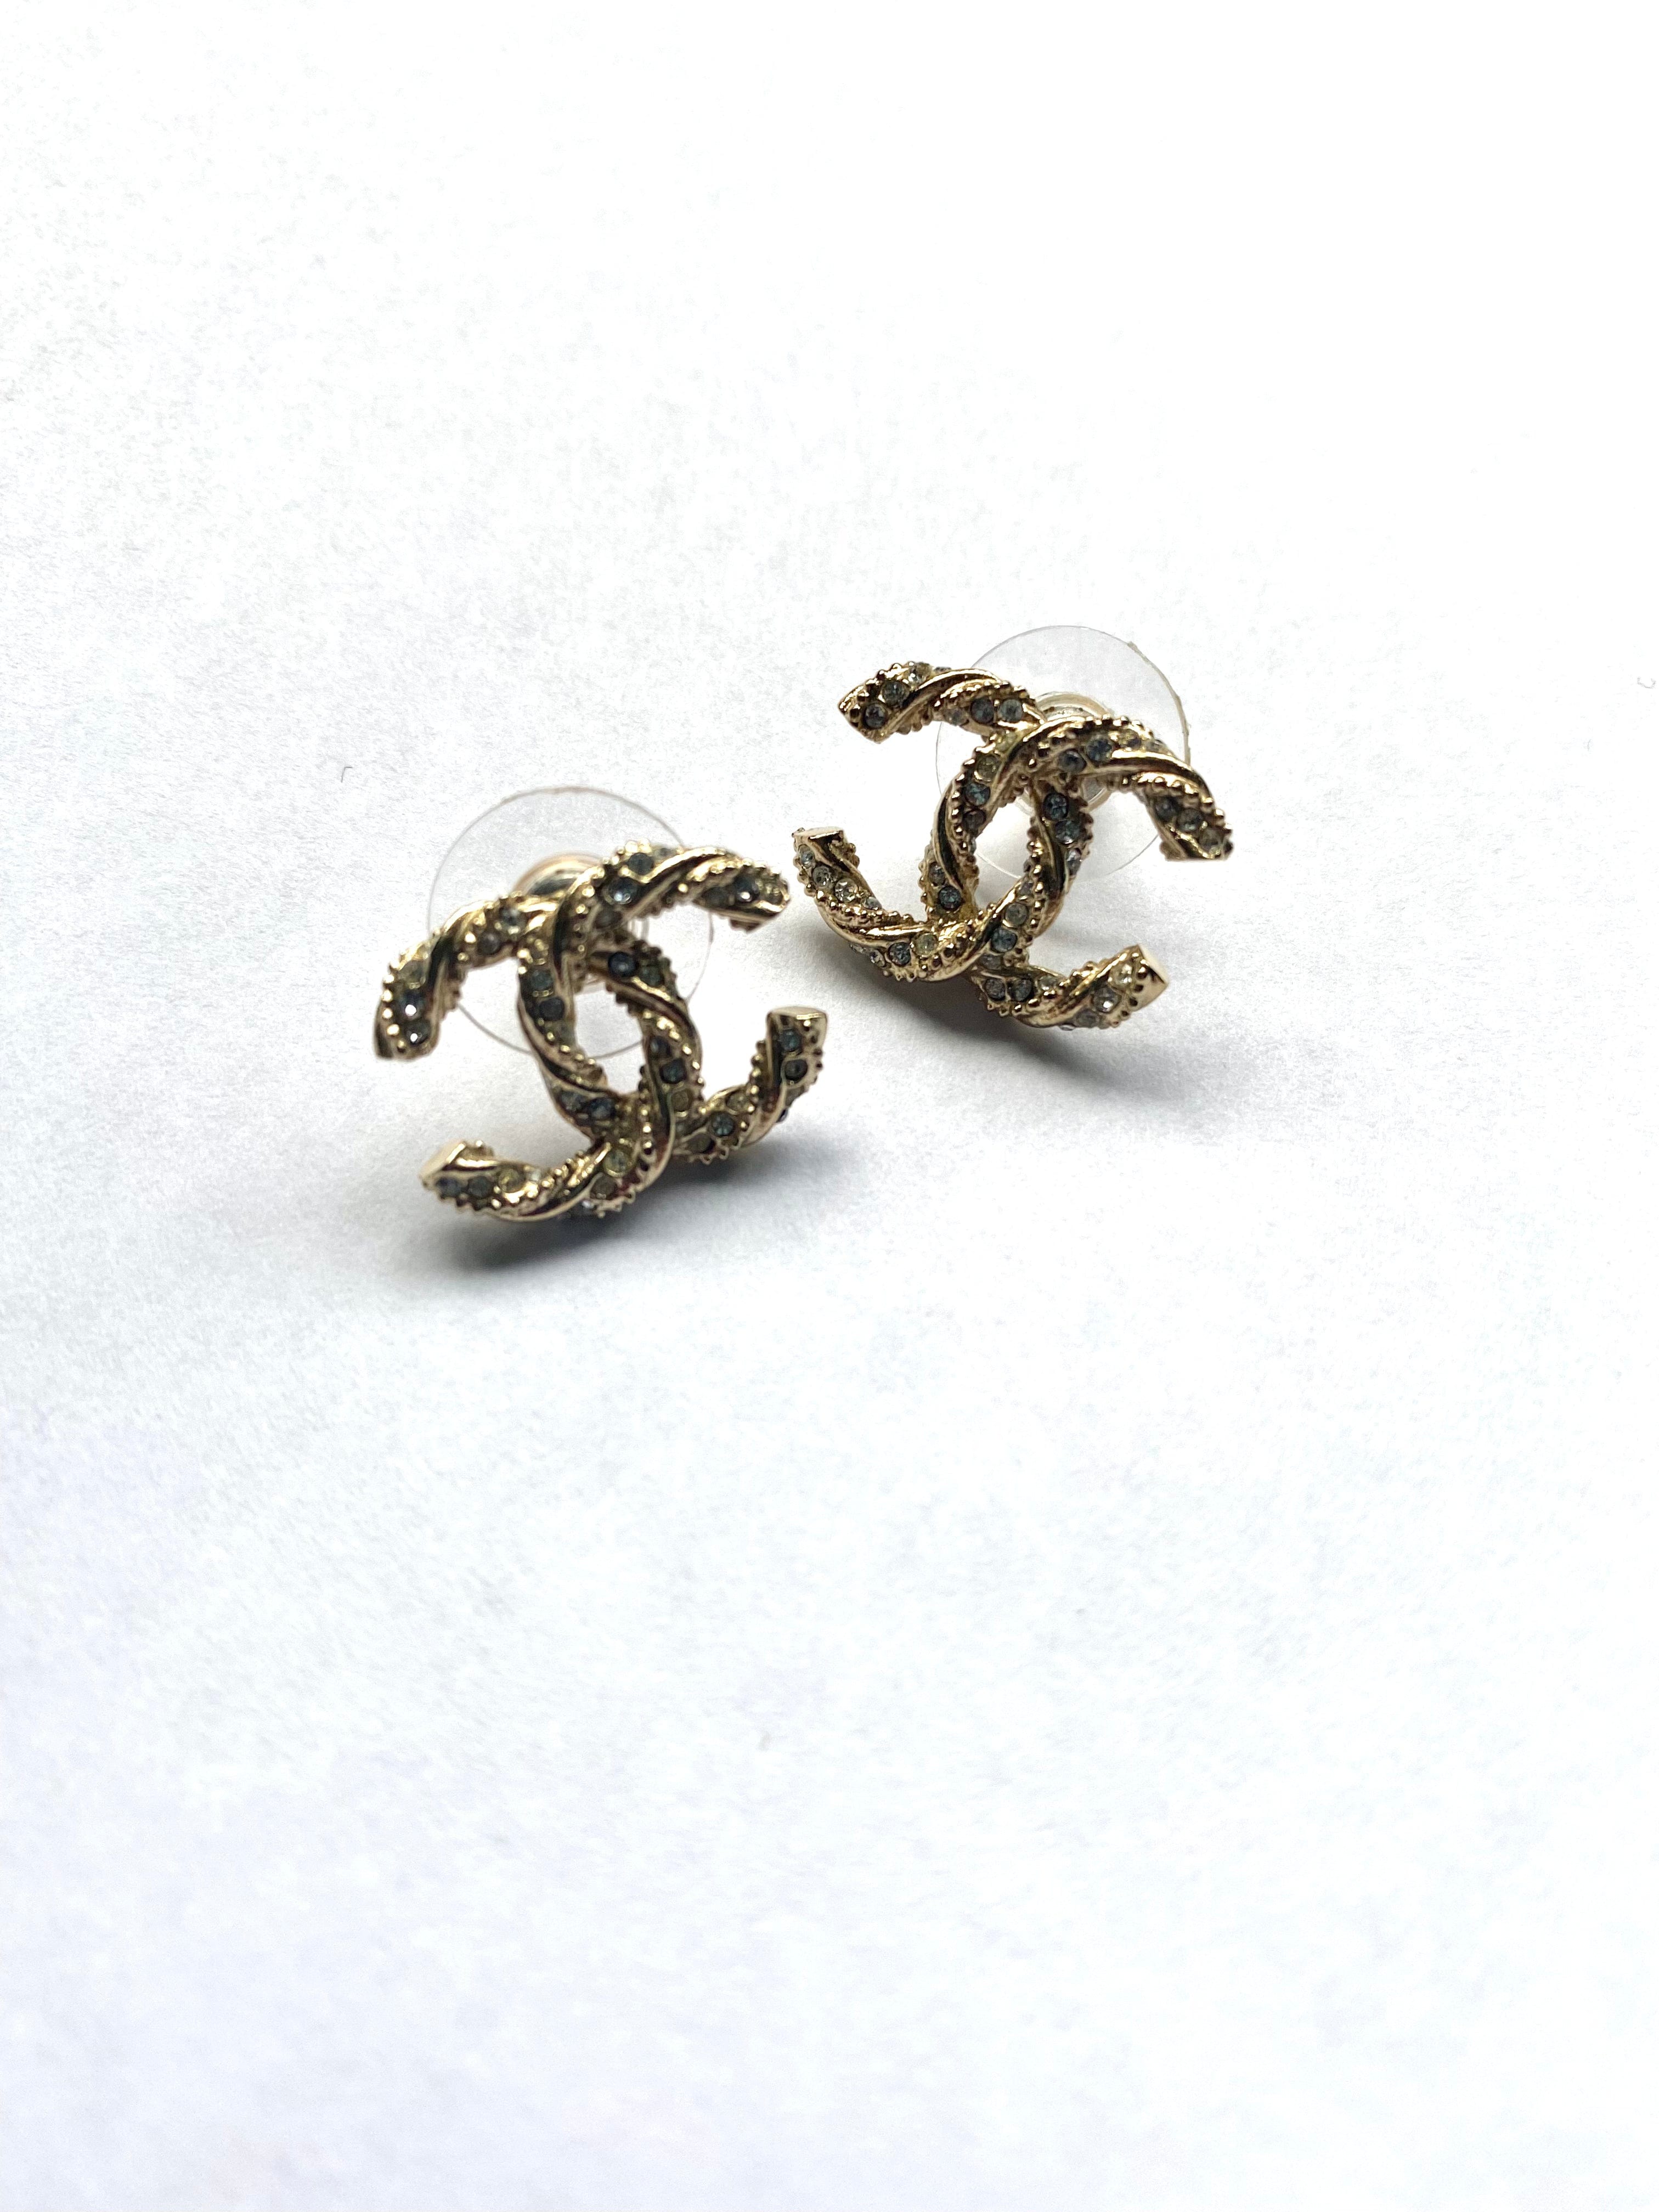 Chanel Chanel rope style CC earrings with clear rhiinestone detail stud - AWL4194